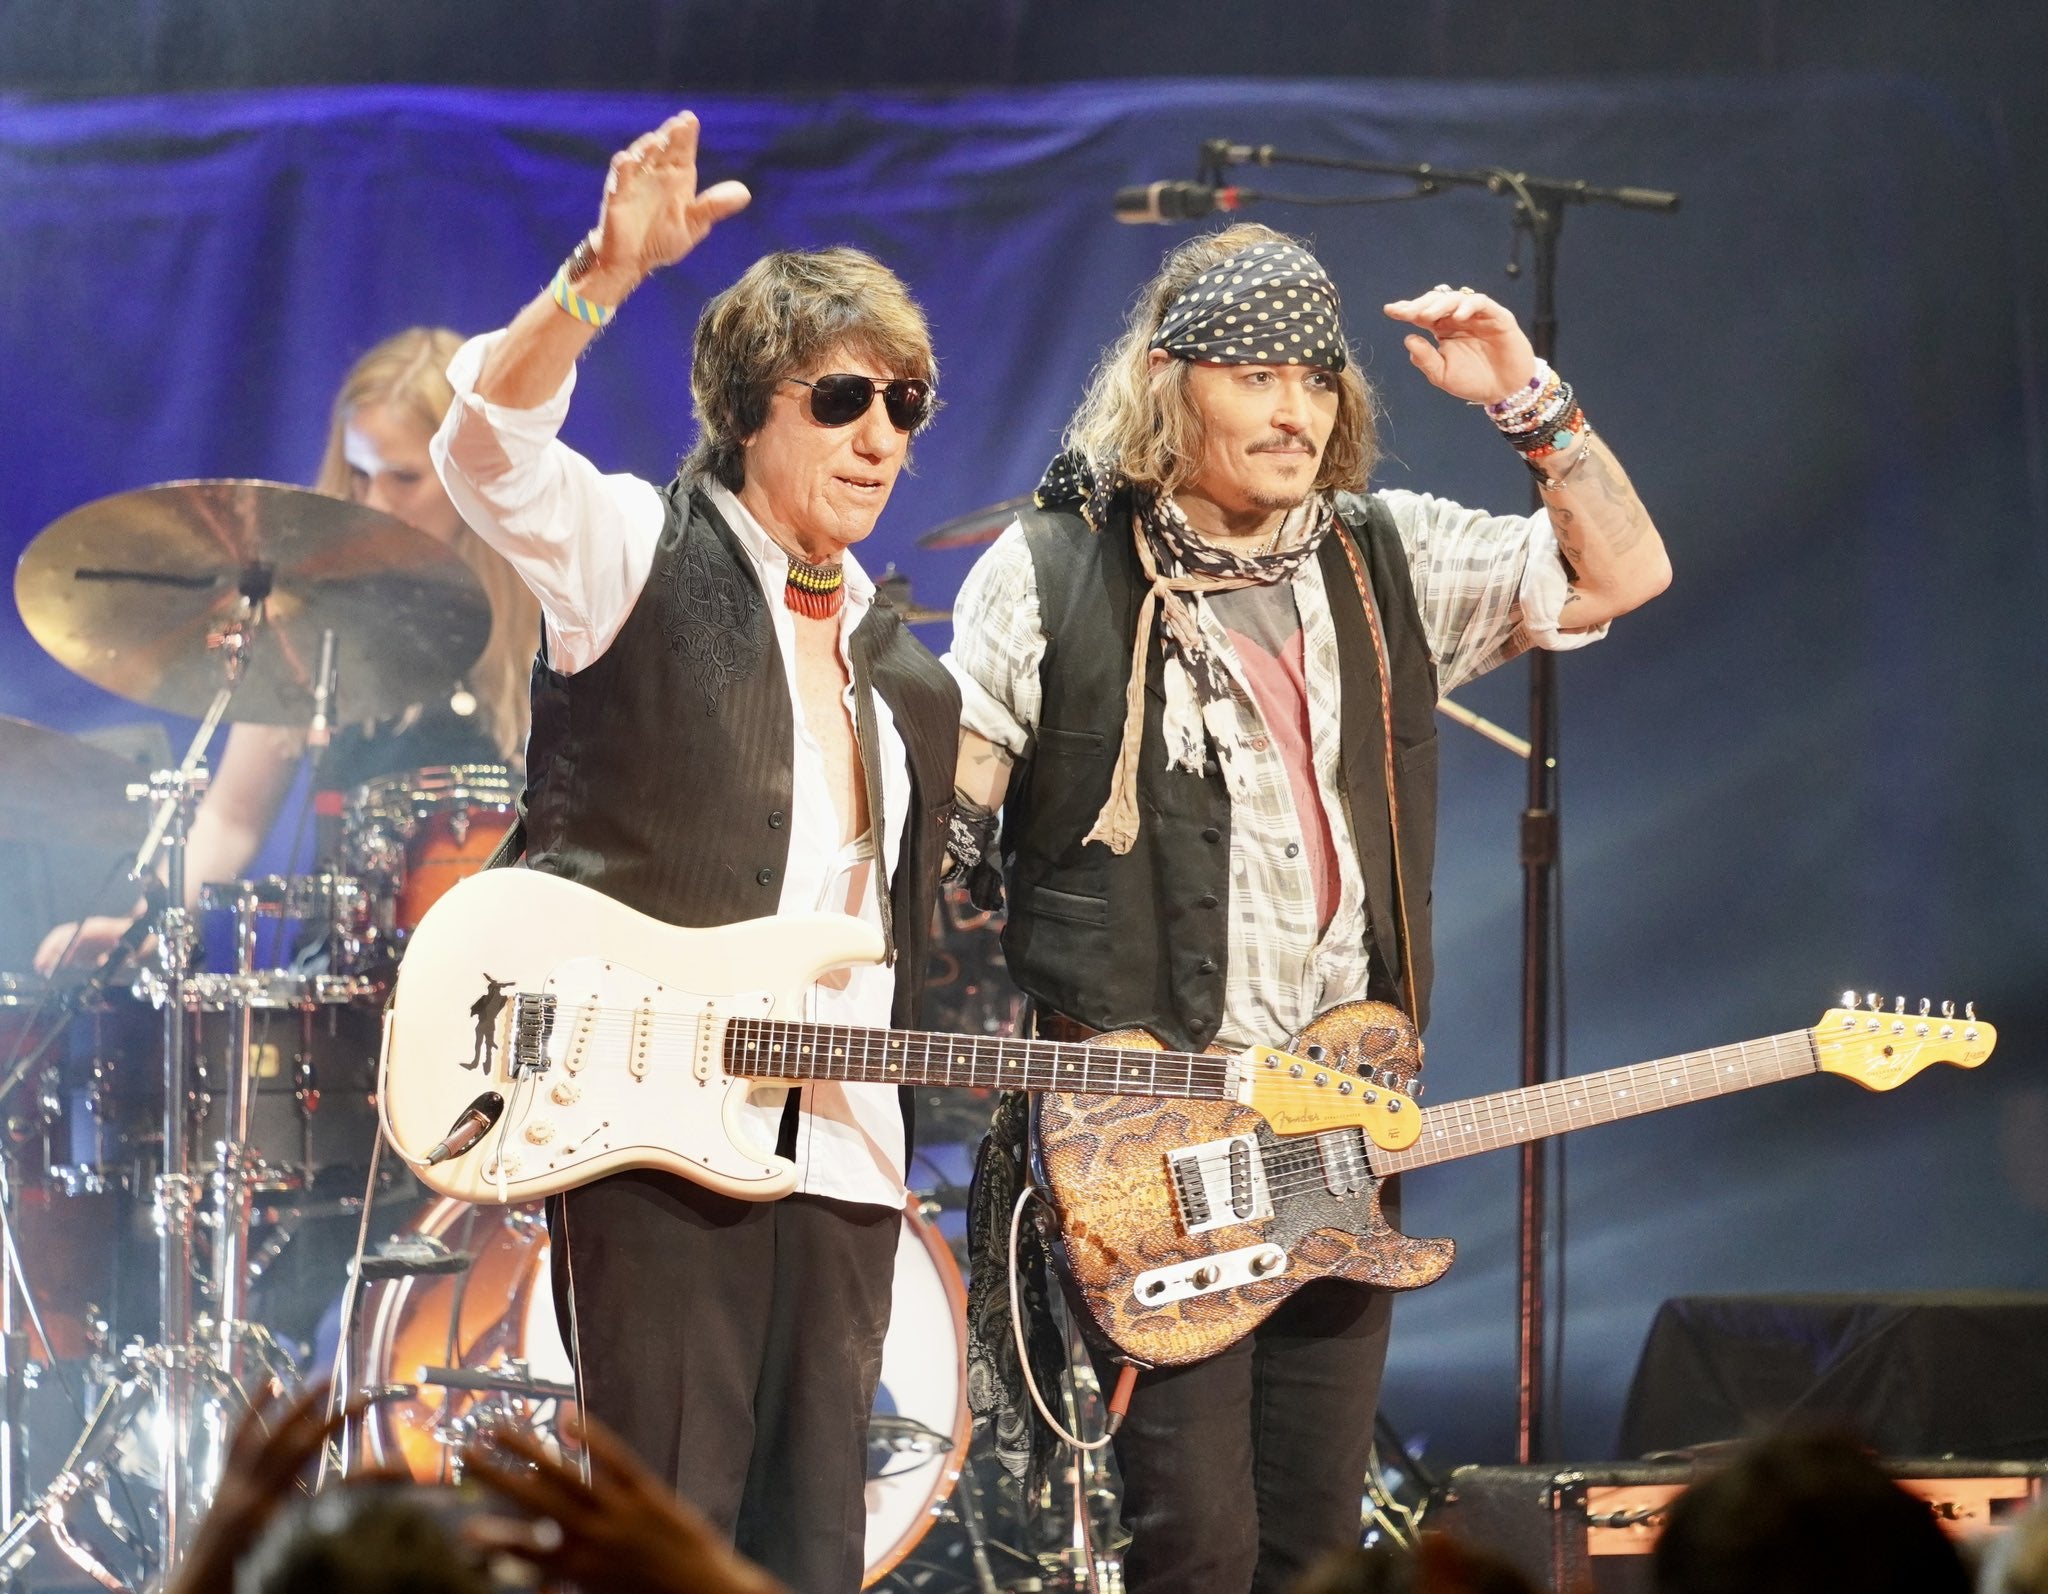 Mr Depp has joined musician Jeff Beck on his UK tour this week, appearing on stage to sing with him at various venues across the UK (Raph Pour-Hashemi/PA)